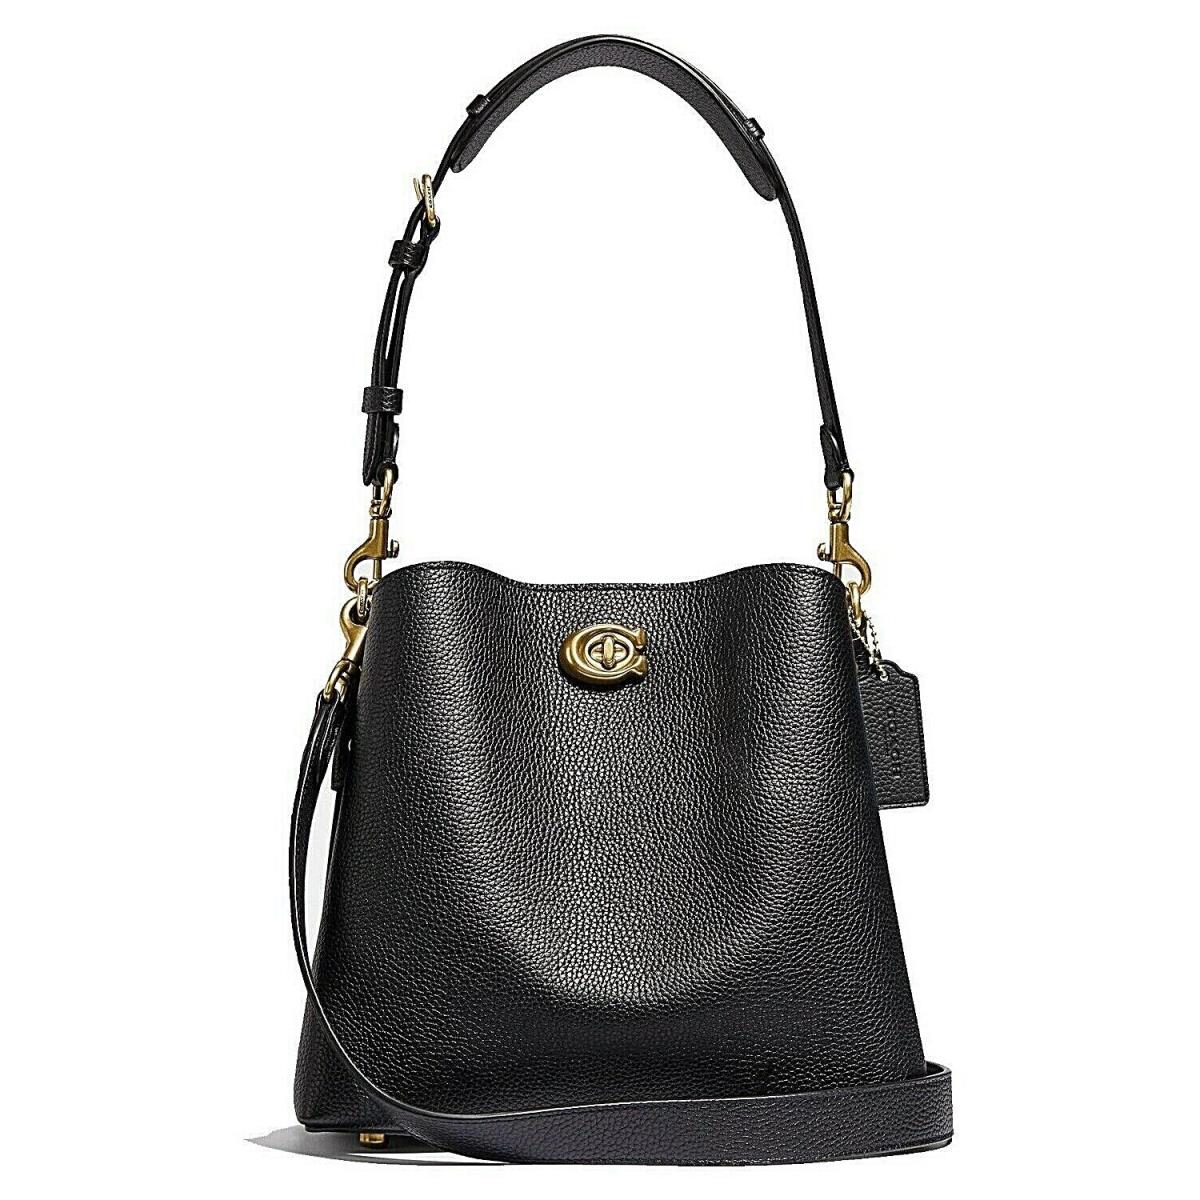 Coach Willow Small Black/brass Leather Bucket Bag Packaging - Black Exterior